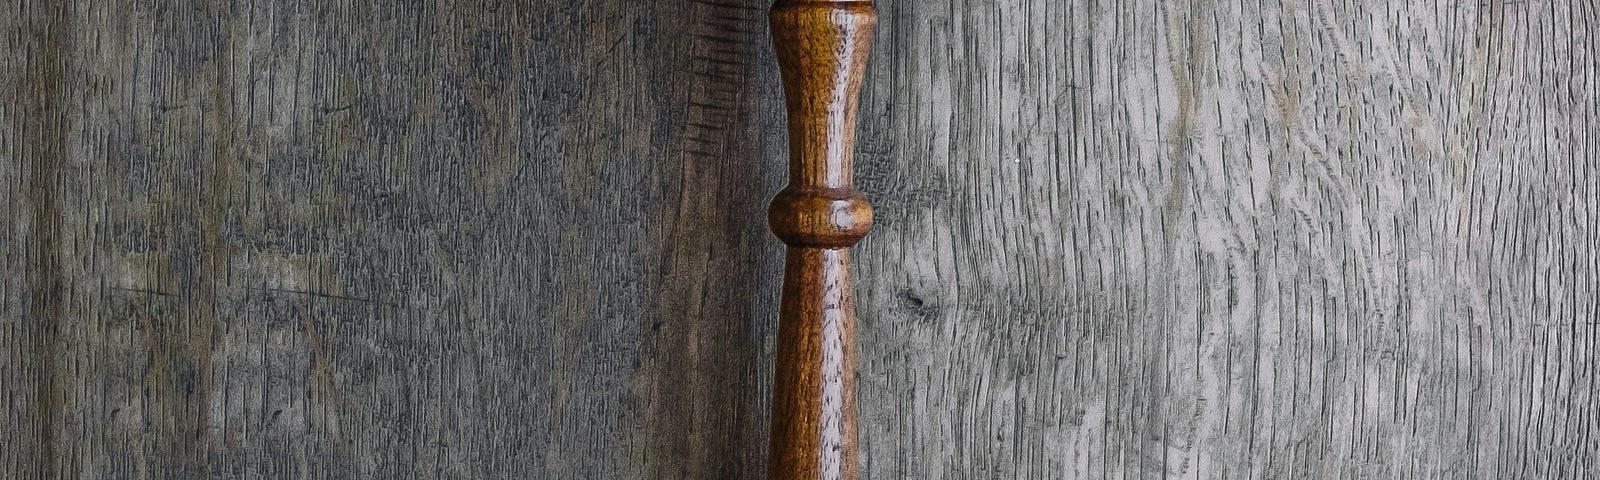 An old wooden judge’s gavel.